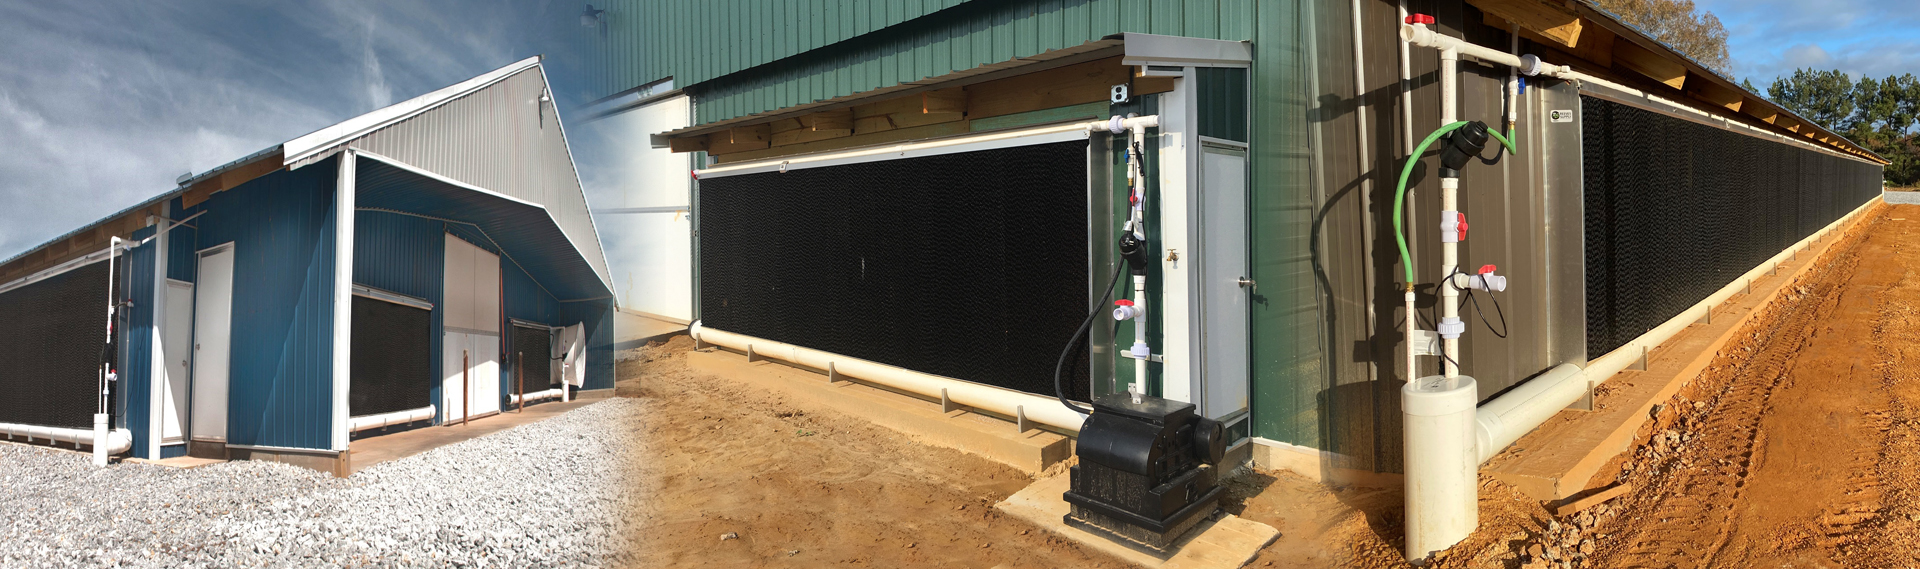 Reeves Evaporative Cooling Systems